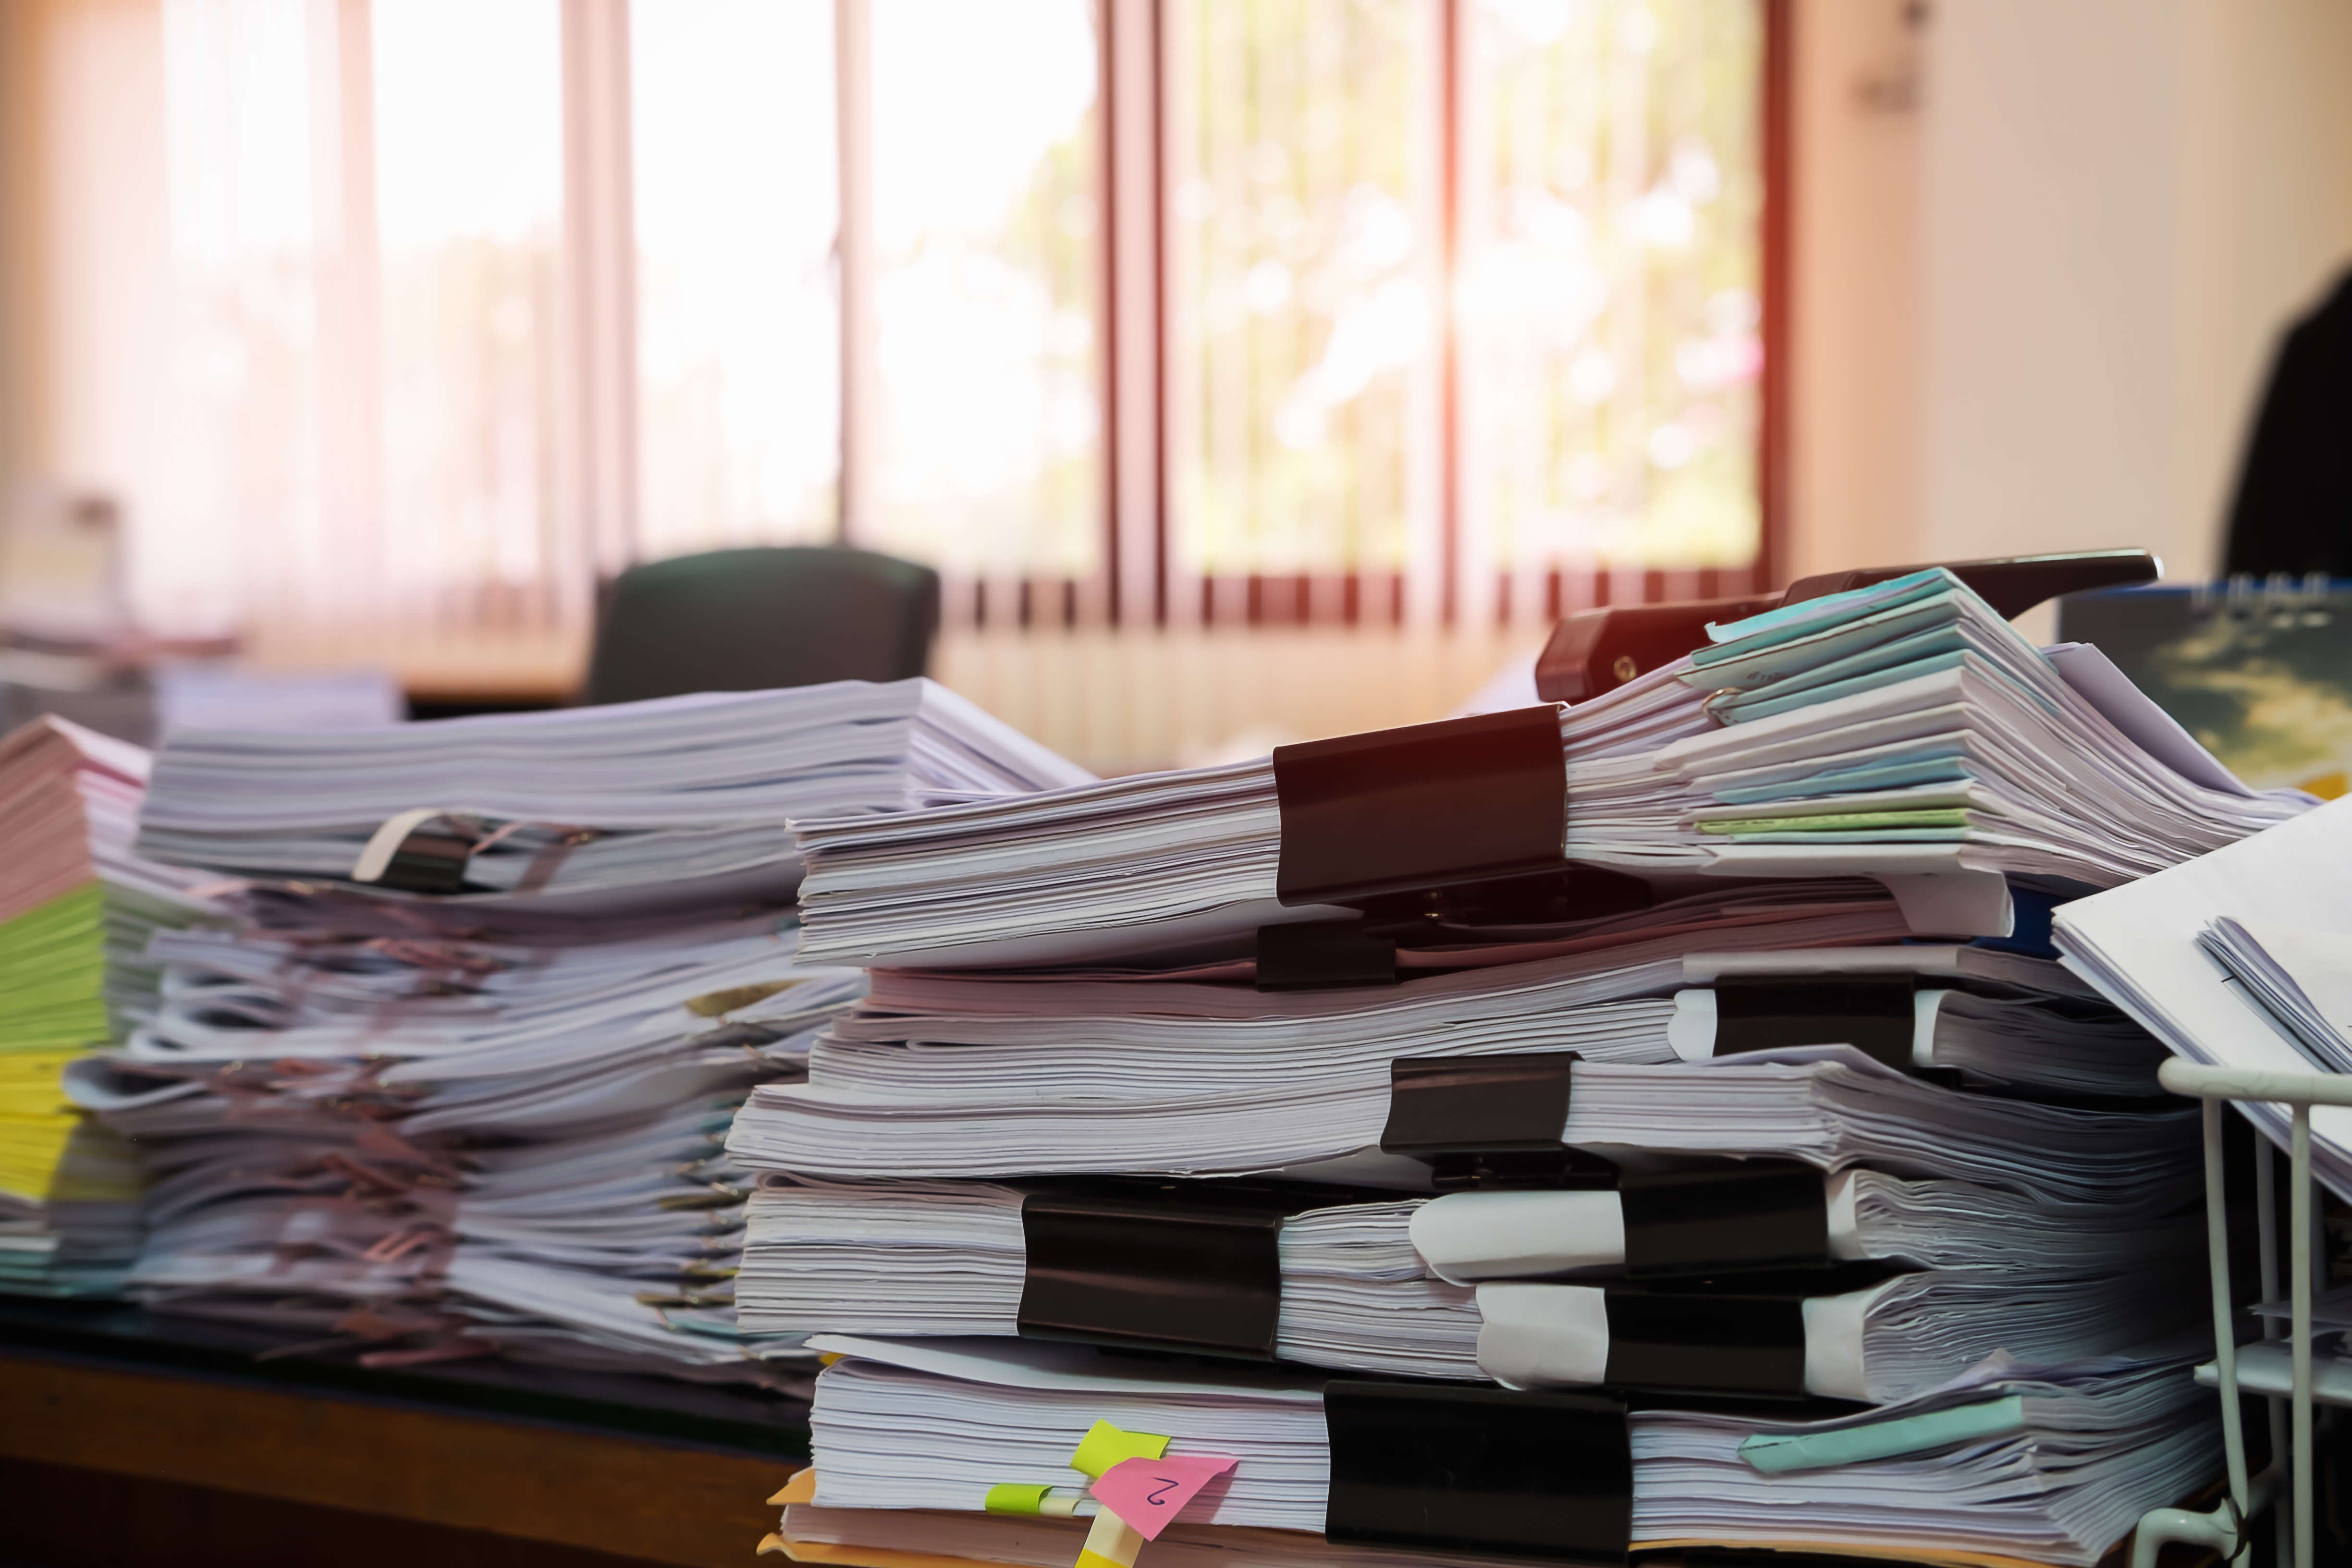 Stacks of incomplete paperwork due to misaligned communication channels